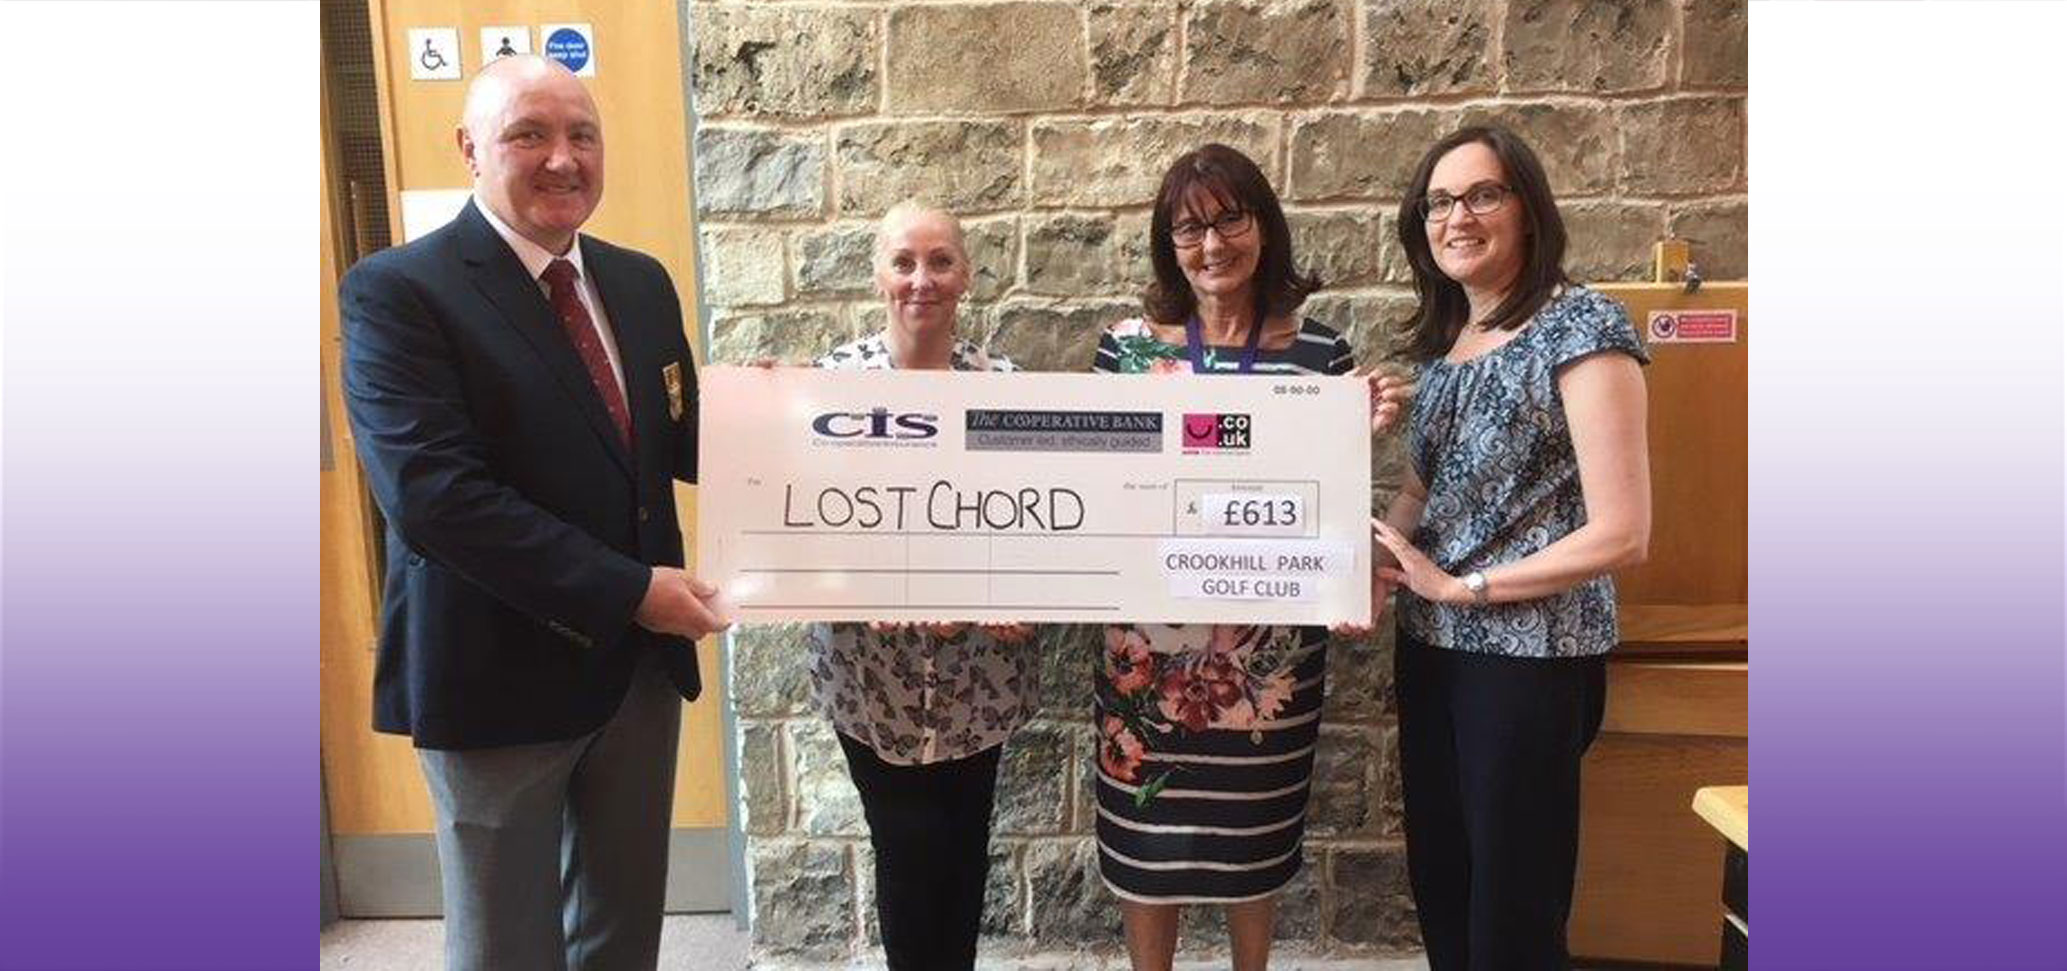 Croohill Park Golf Club makes donation to Lost Chord Dementia Charity